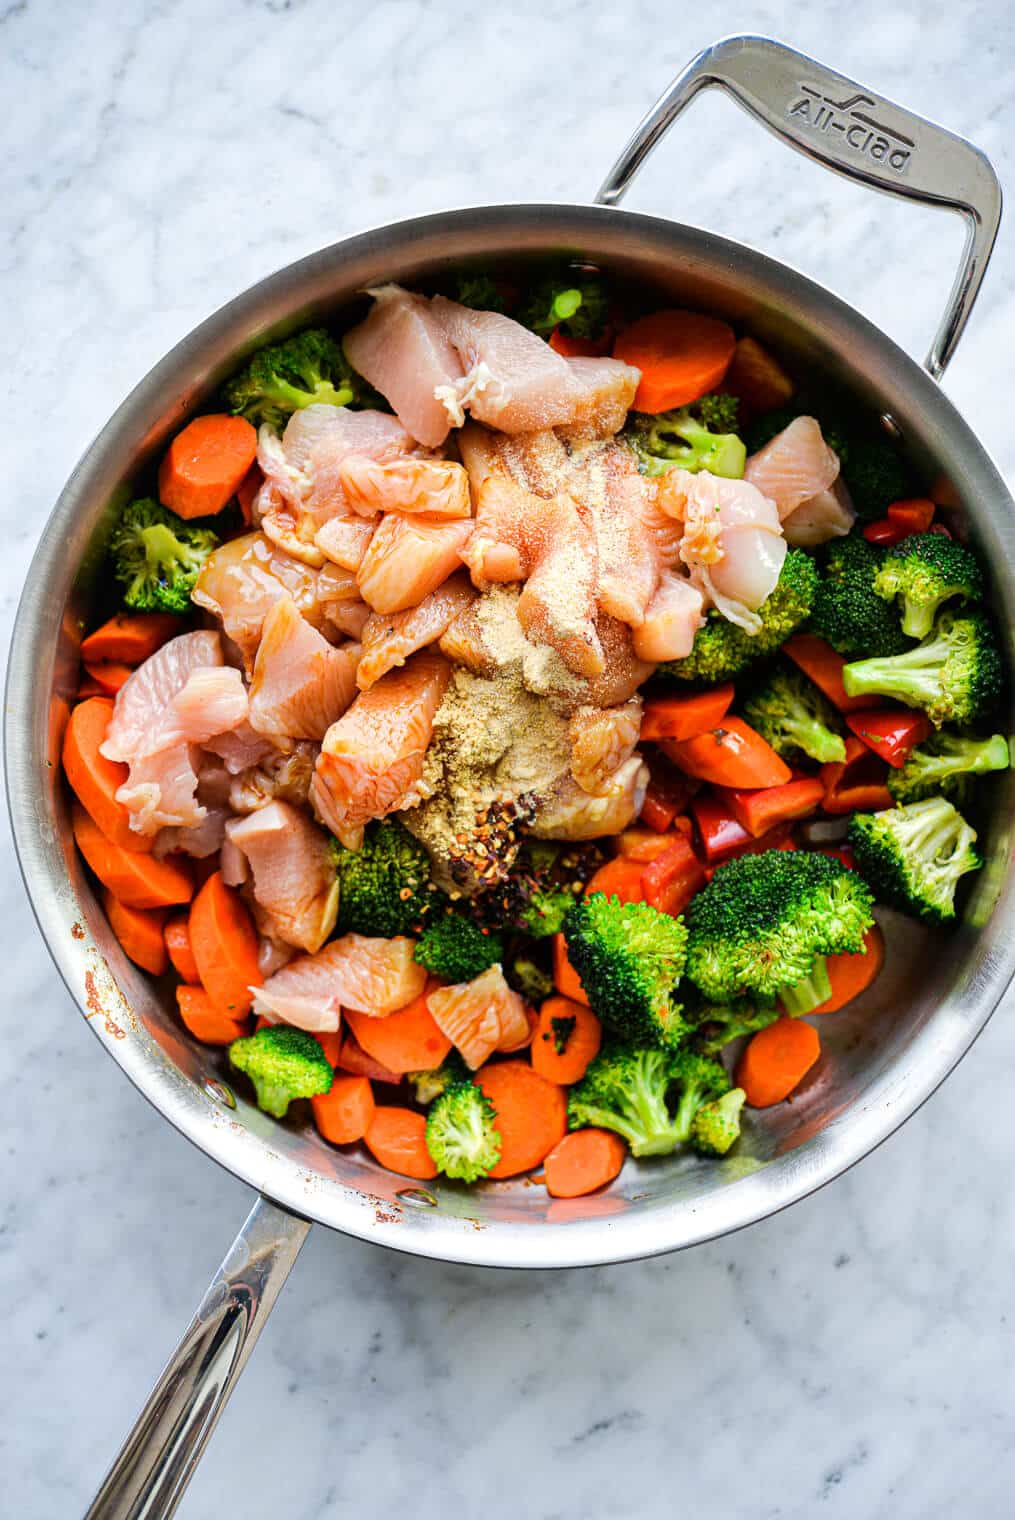 the ingredients for chicken stir fry in a large stainless steel skillet